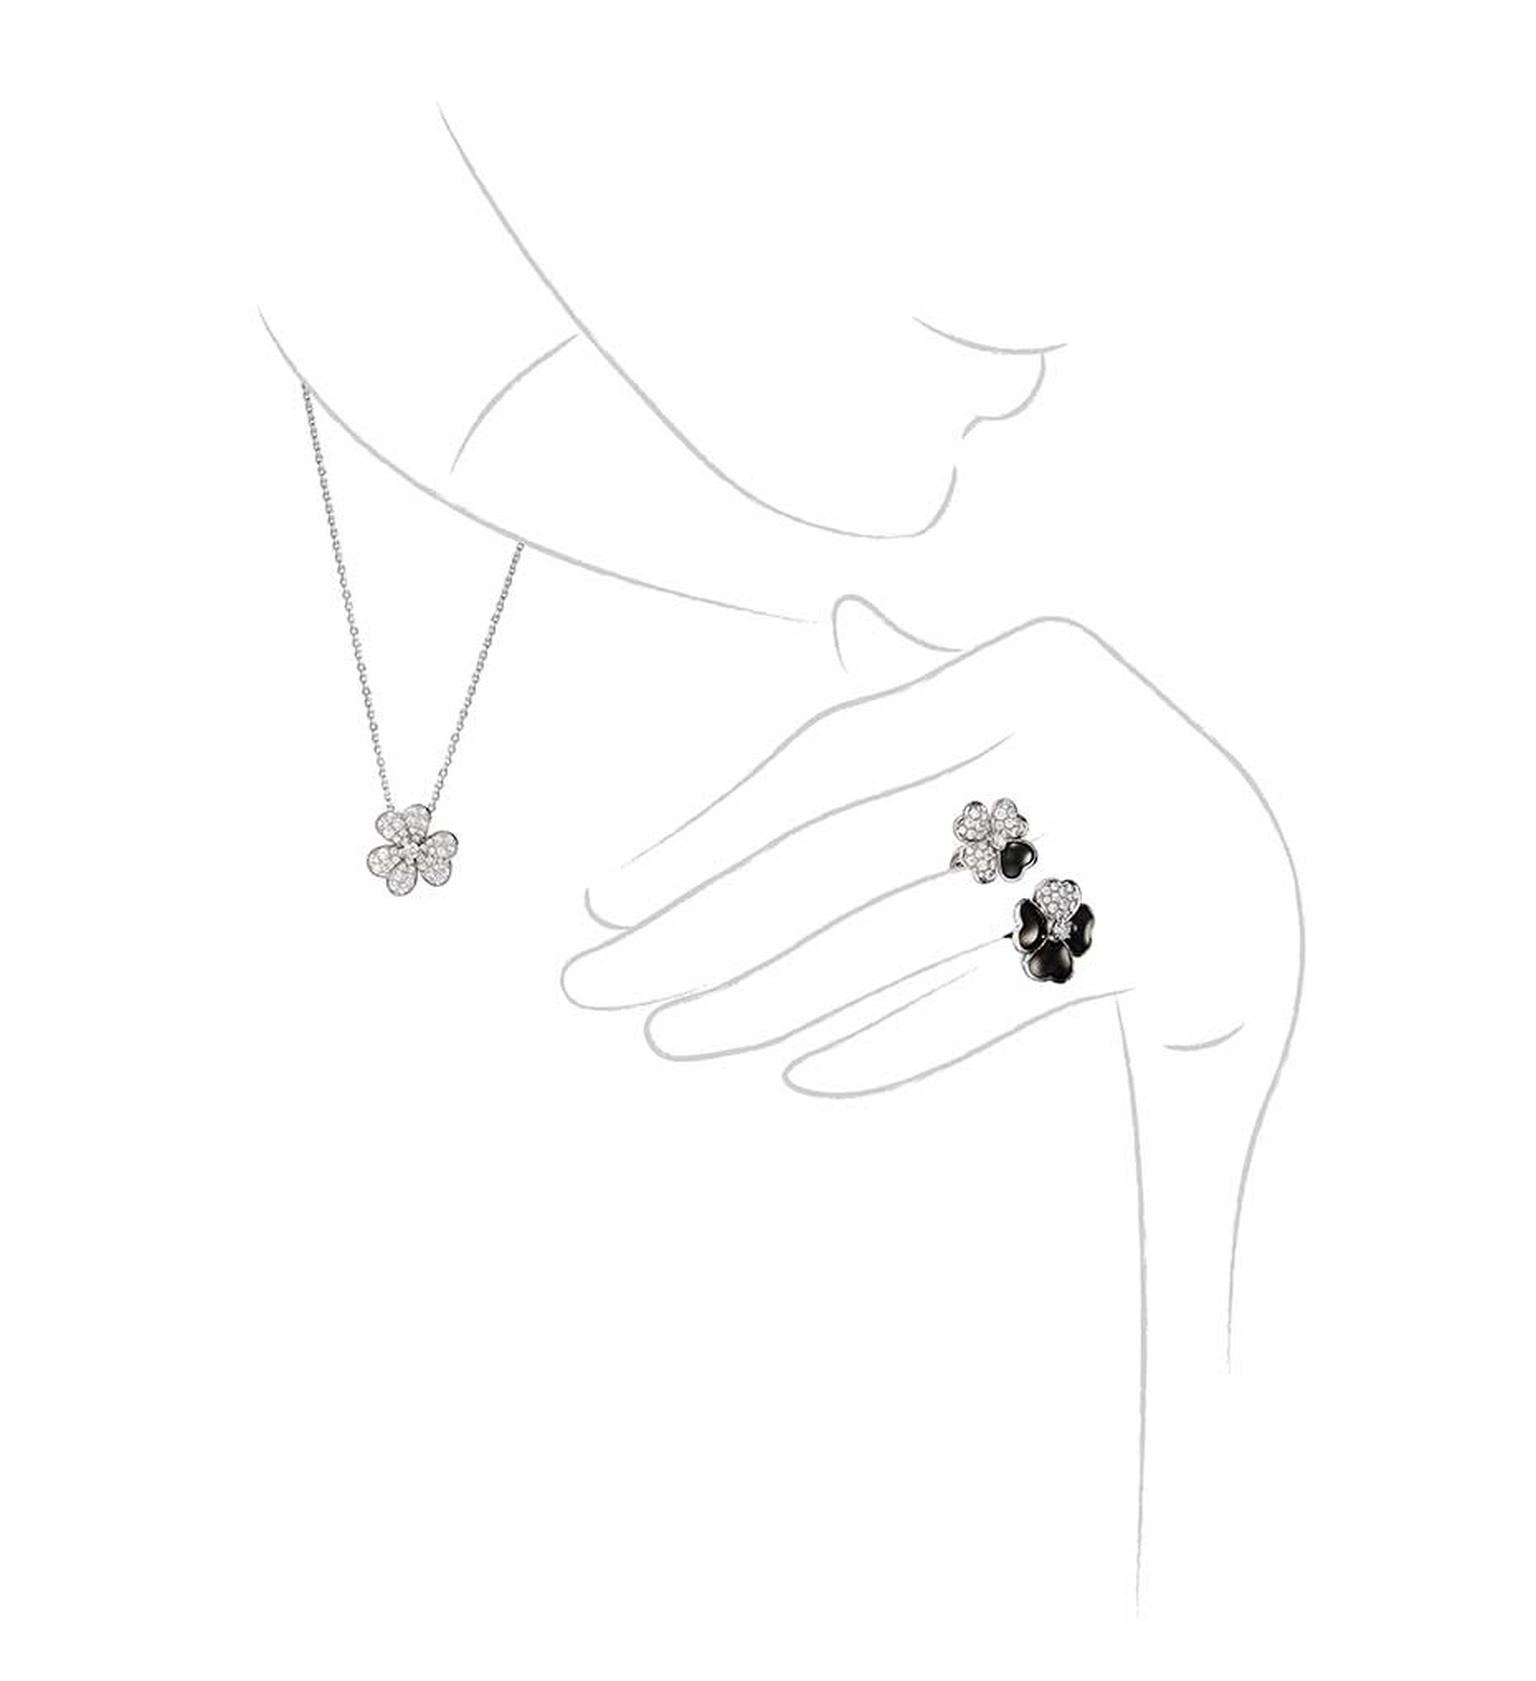 Van Cleef & Arpels Cosmos Between the Finger onyx and diamond ring and Cosmos diamond necklace